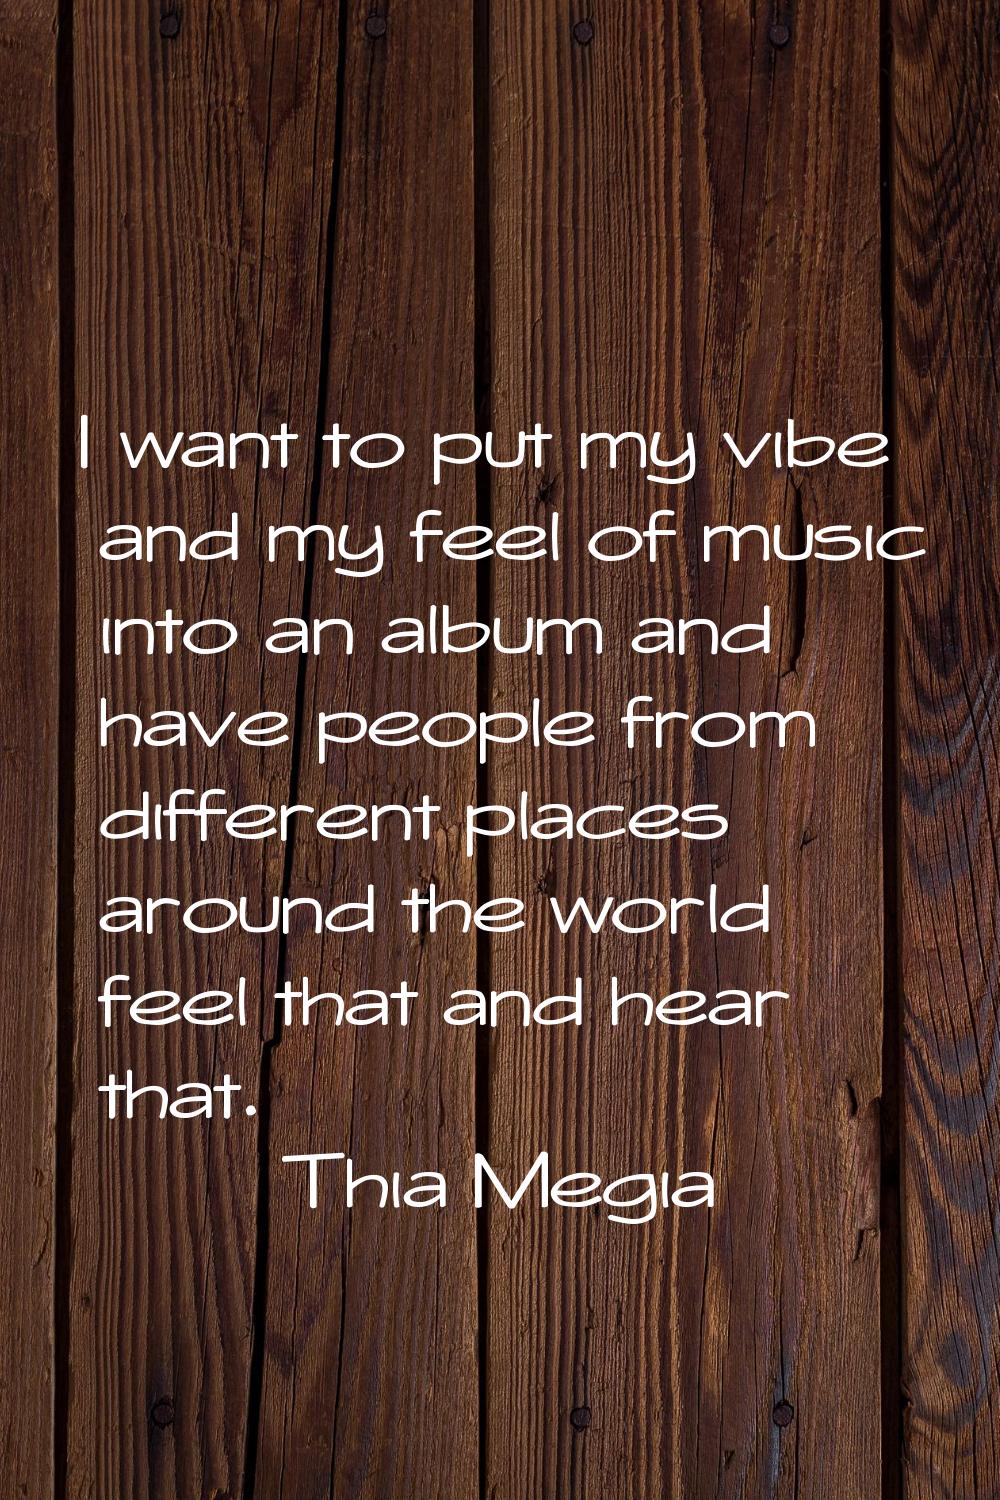 I want to put my vibe and my feel of music into an album and have people from different places arou